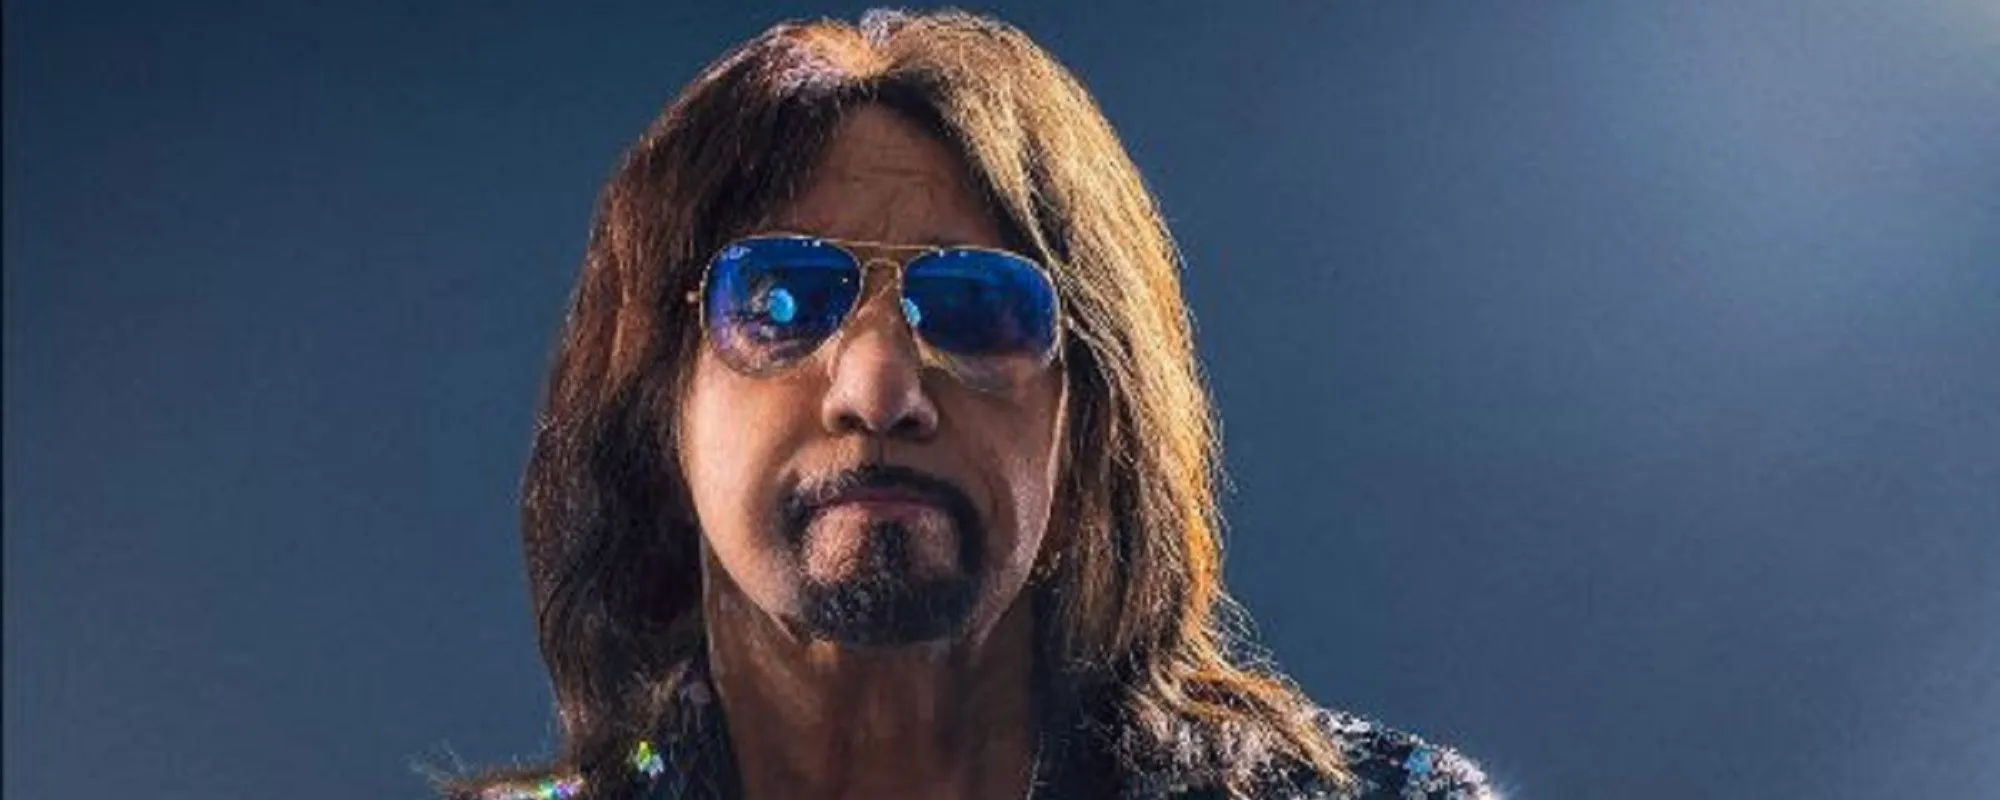 Ace Frehley Takes Dig at KISS Successor Tommy Thayer: “It’s Back to the Breadline for Him”